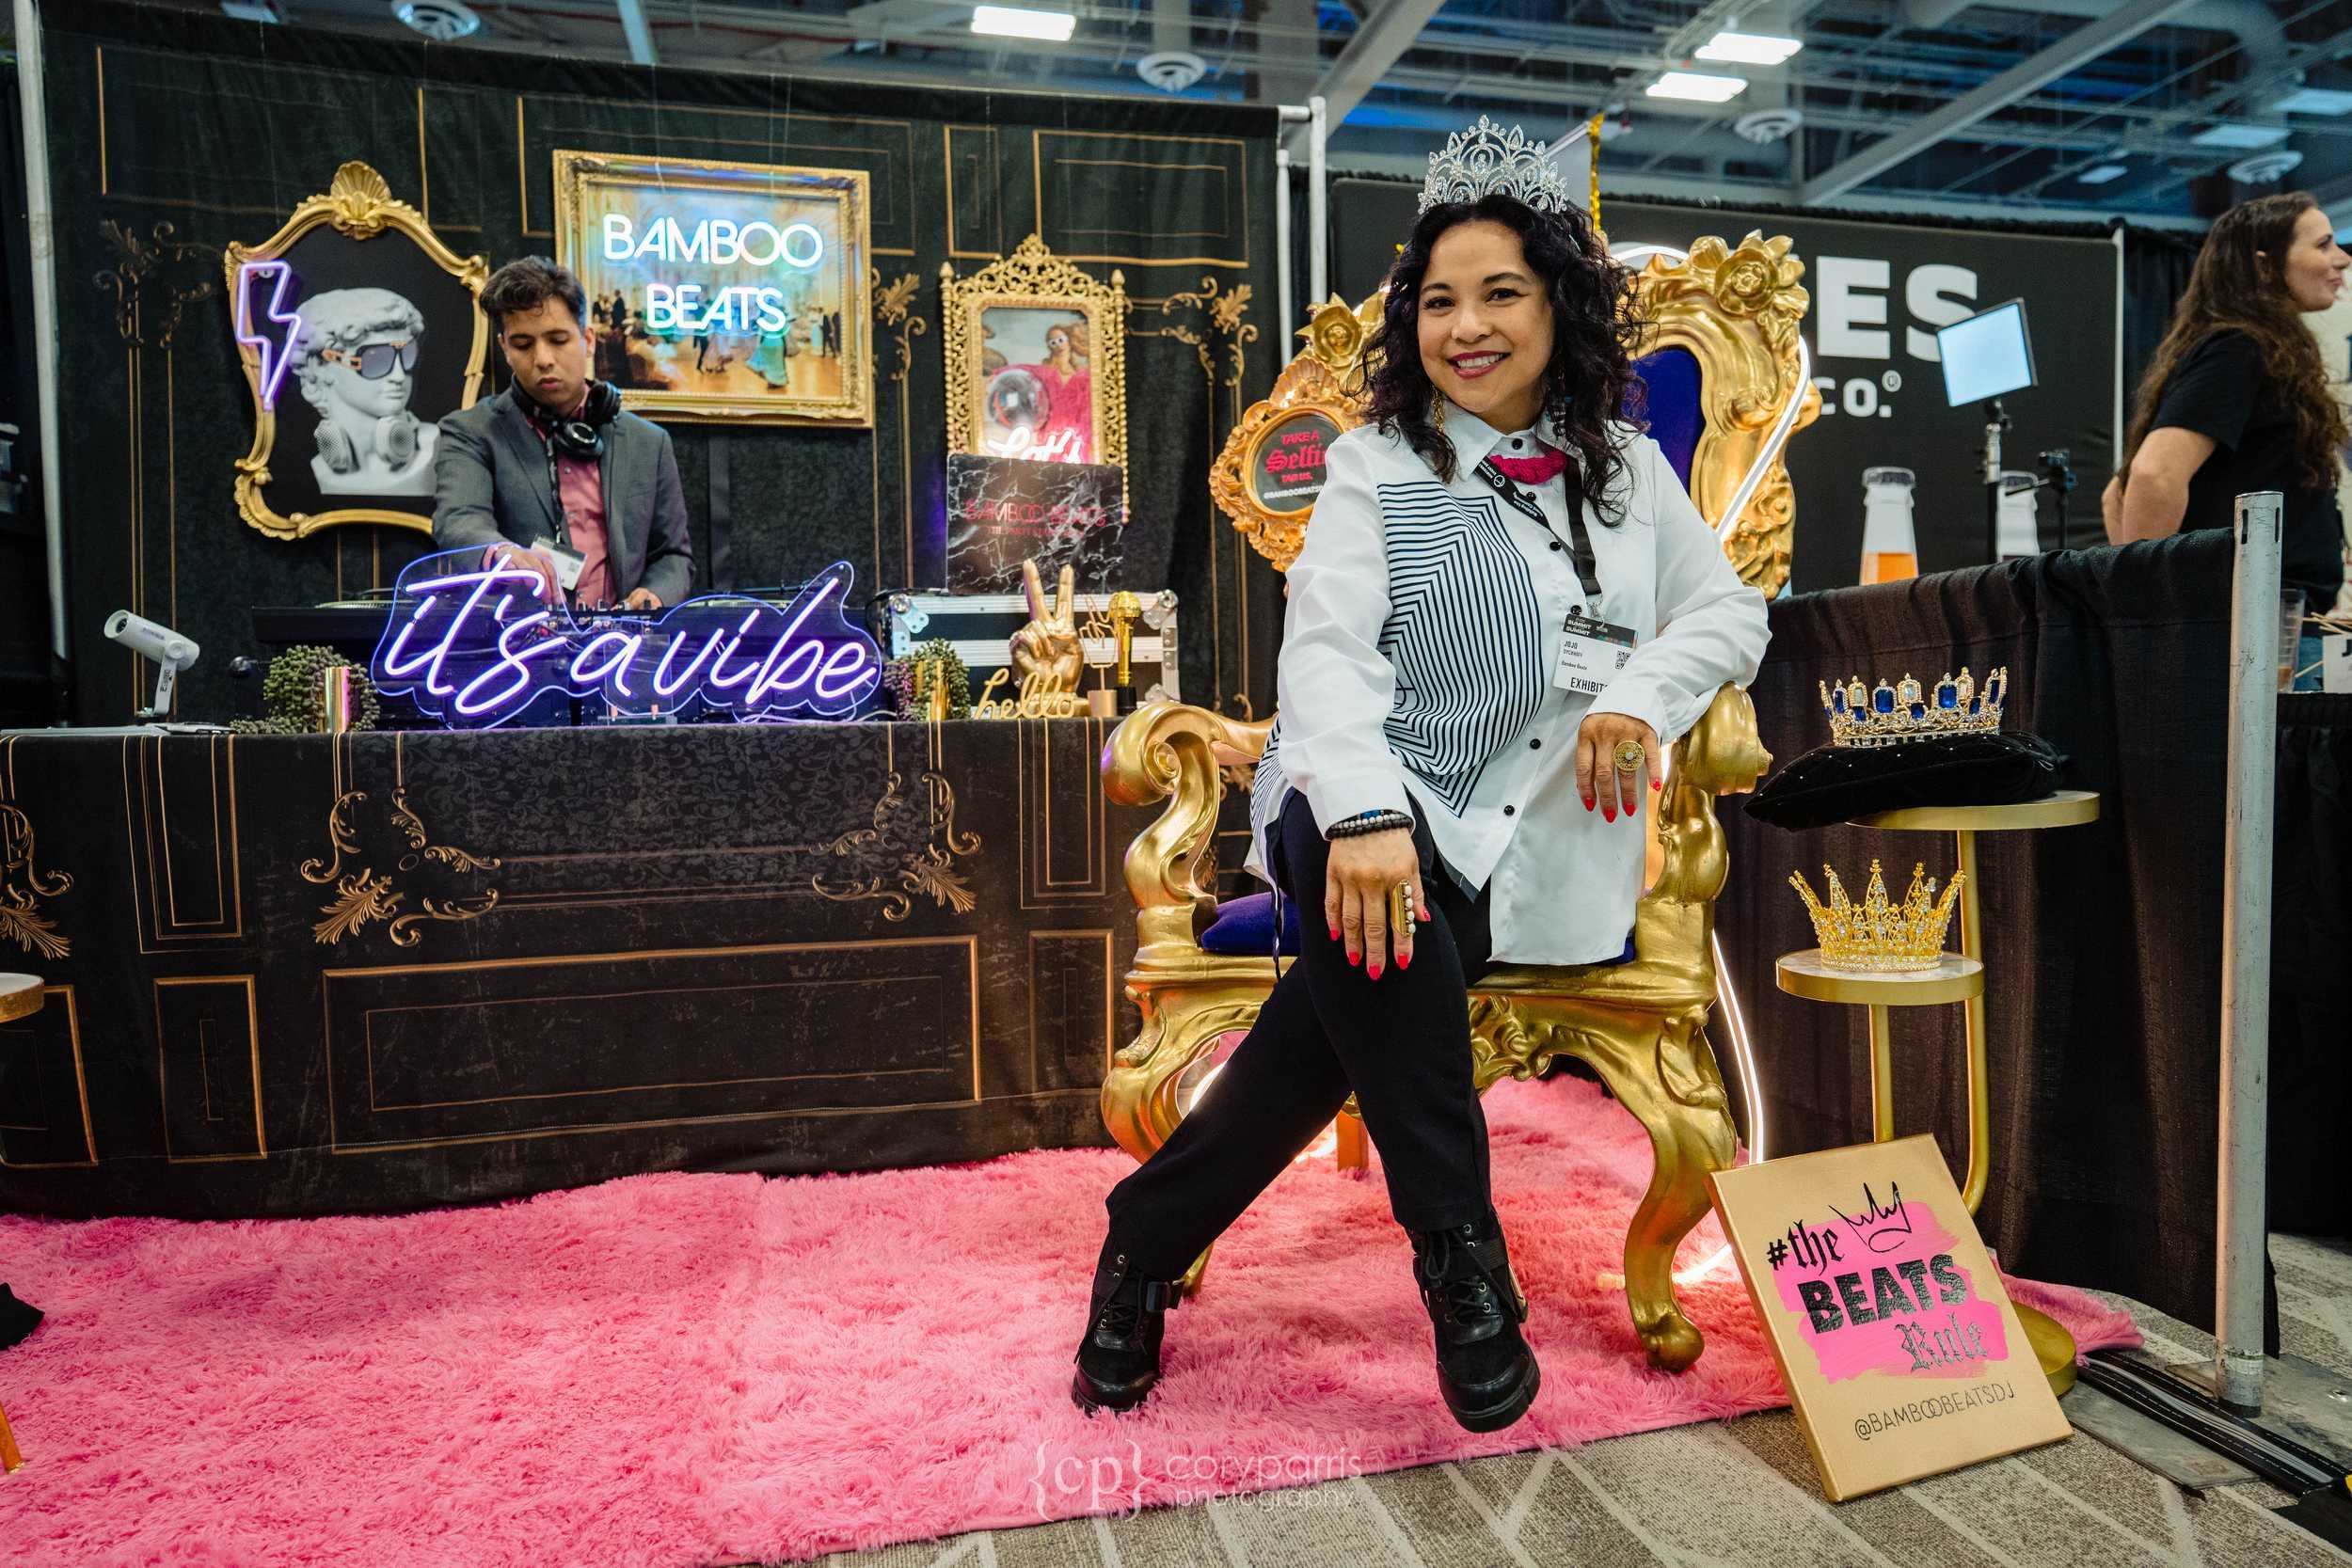  Queen Jojo of Bamboo Beats in her booth at the NW Event Show 